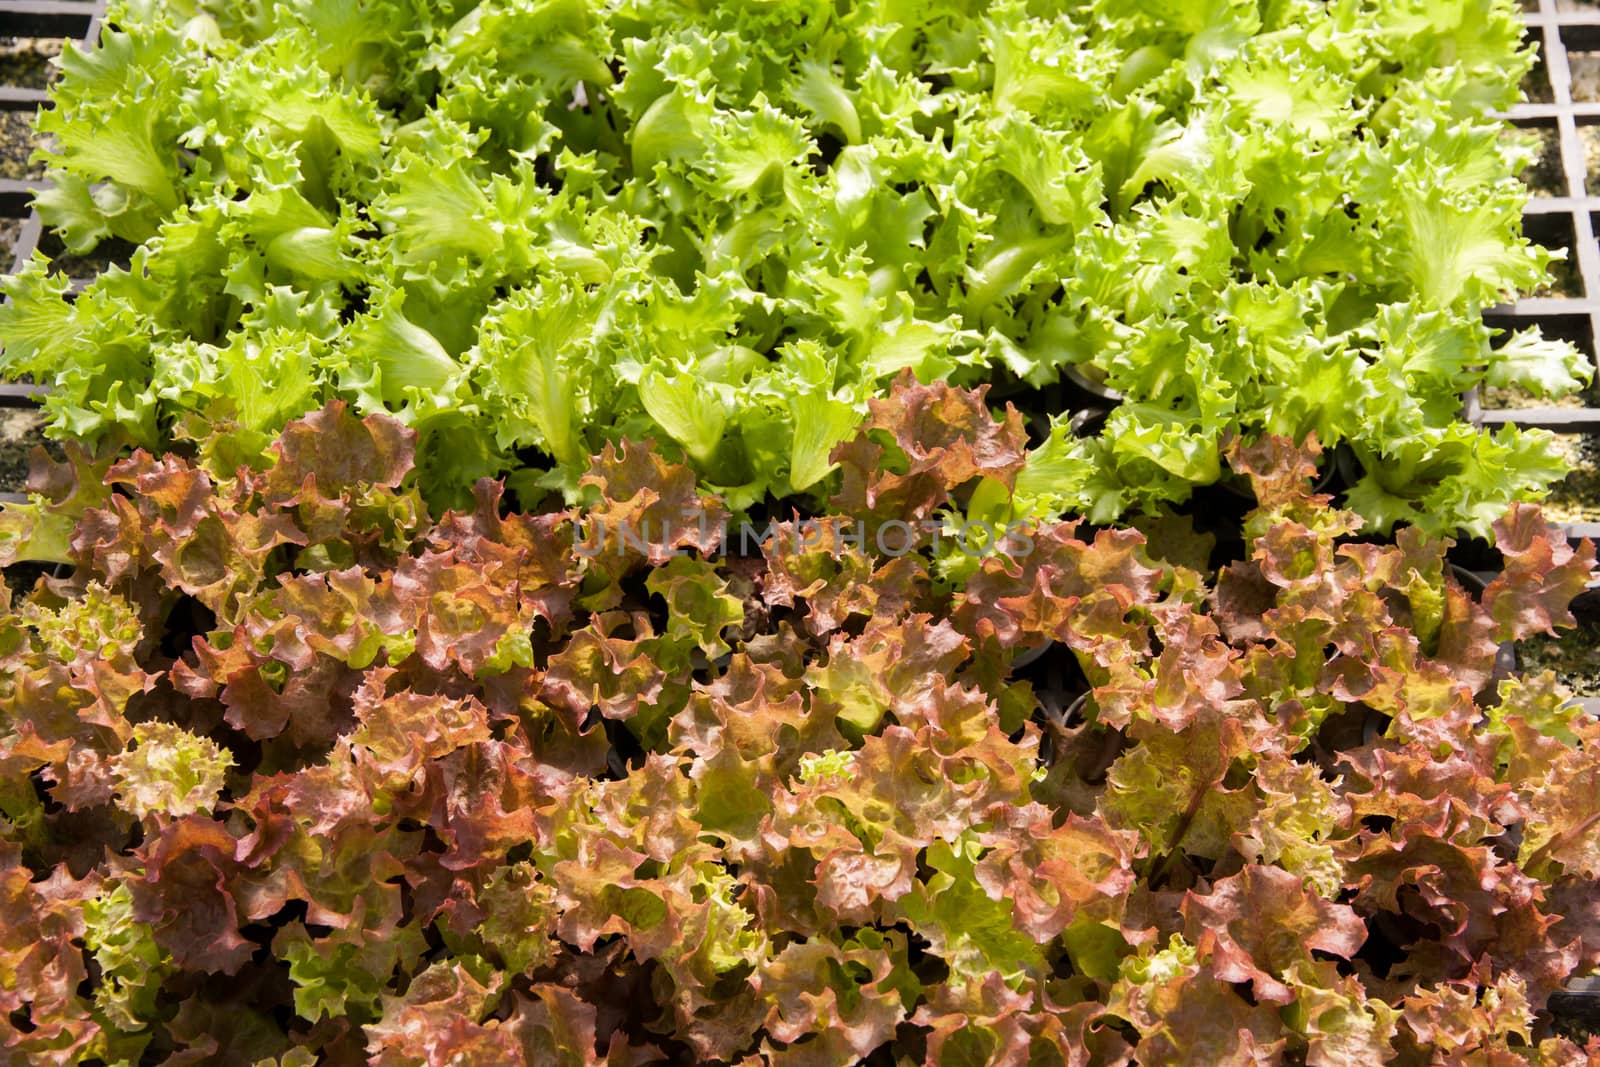 Organic hydroponic lettuce cultivation farm. Red lettuce and green lettuce.